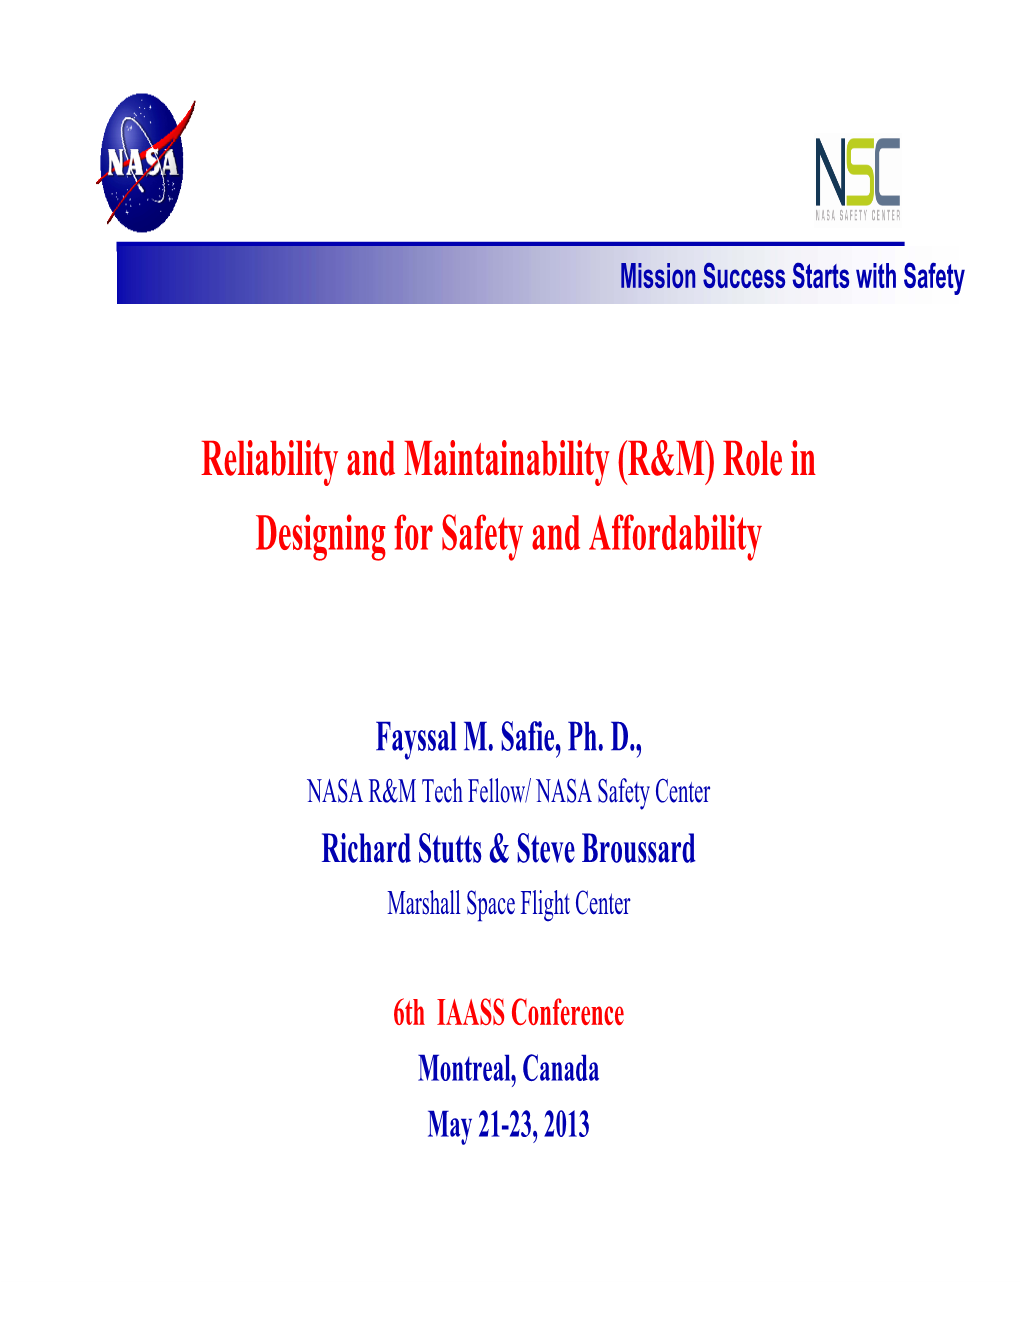 Reliability and Maintainability (R&M) Role in Designing for Safety and Affordability